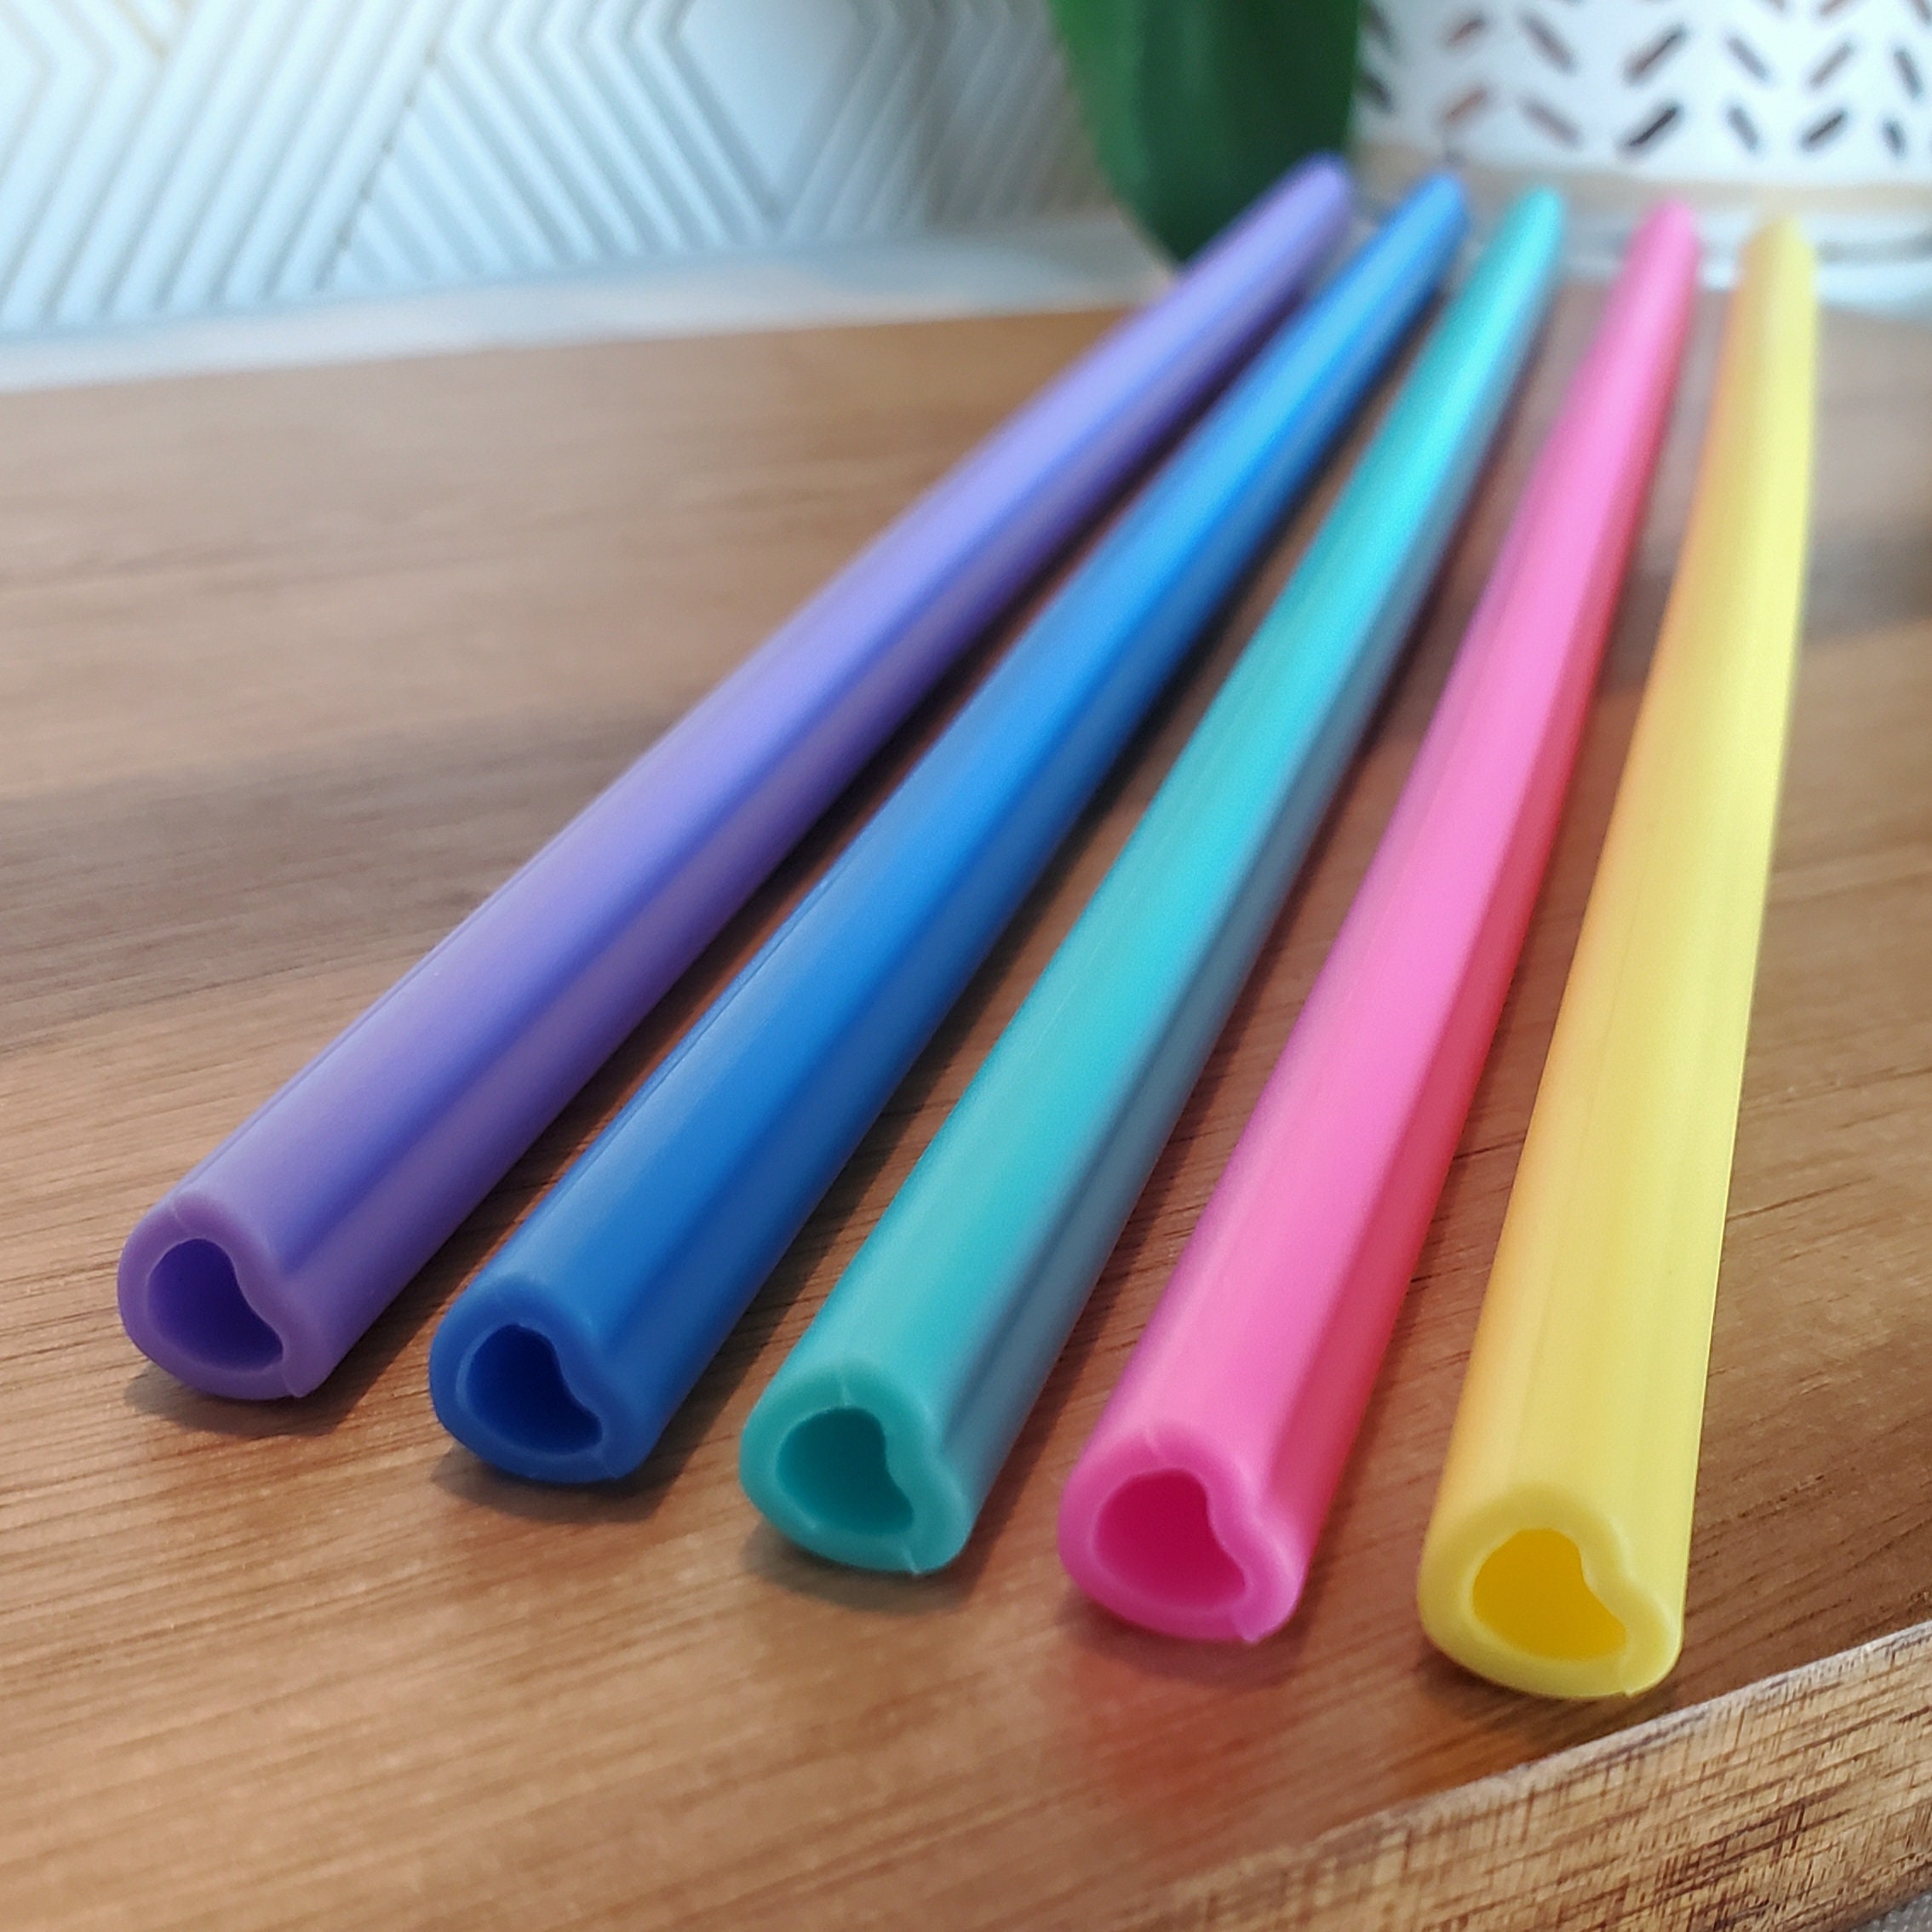 TIDTALEO 30Pcs Silicone Straw Cover tumbler straws cute decor heart wine  charm tags heart drink markers heart straw charms heart decor lovely heart